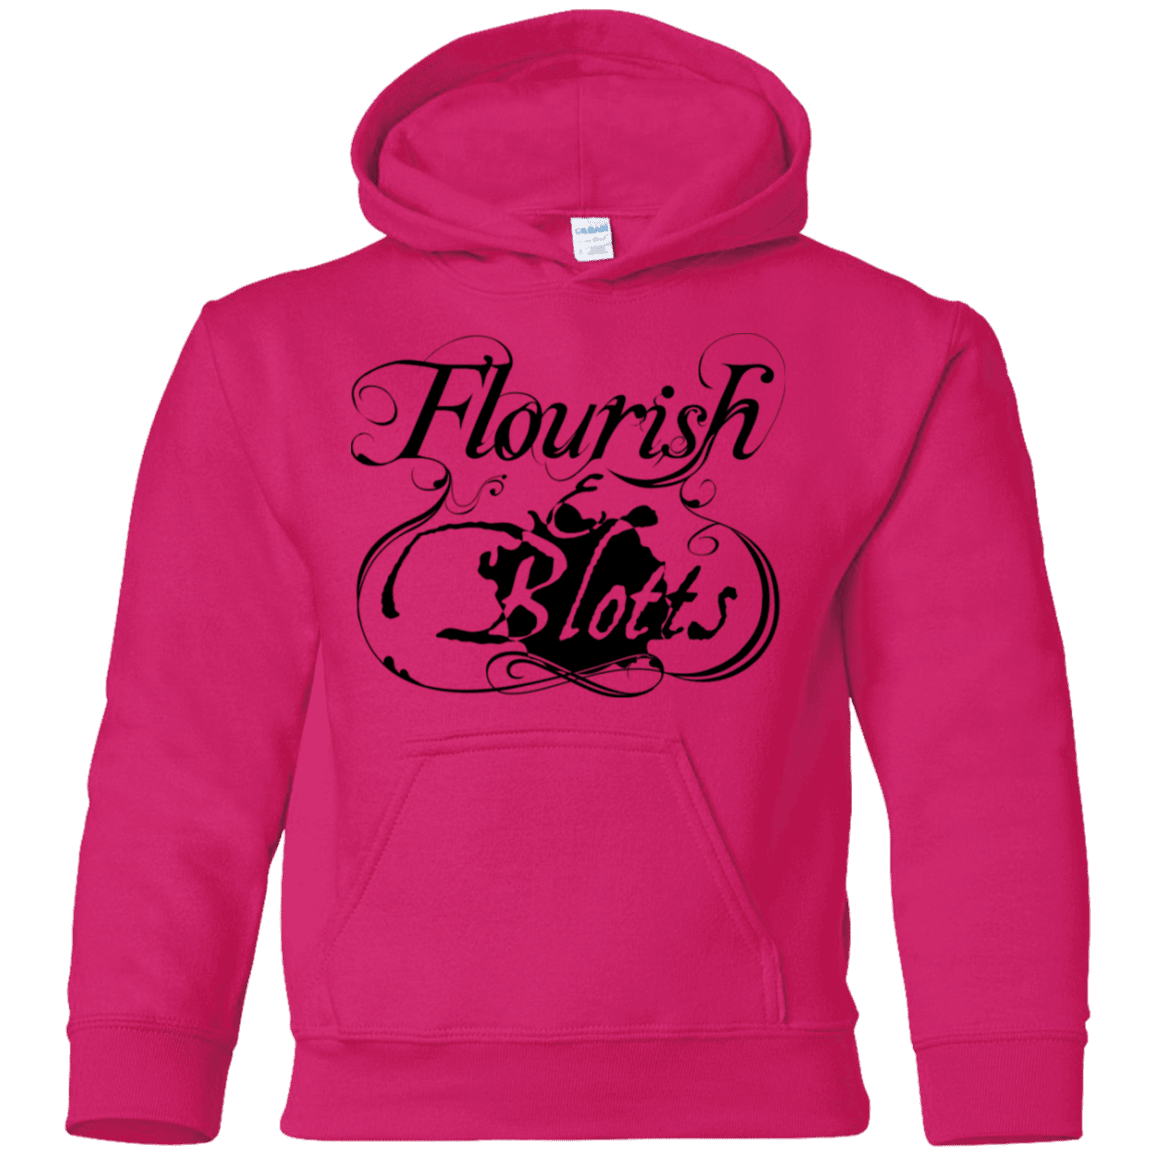 Sweatshirts Heliconia / YS Flourish and Blotts of Diagon Alley Youth Hoodie